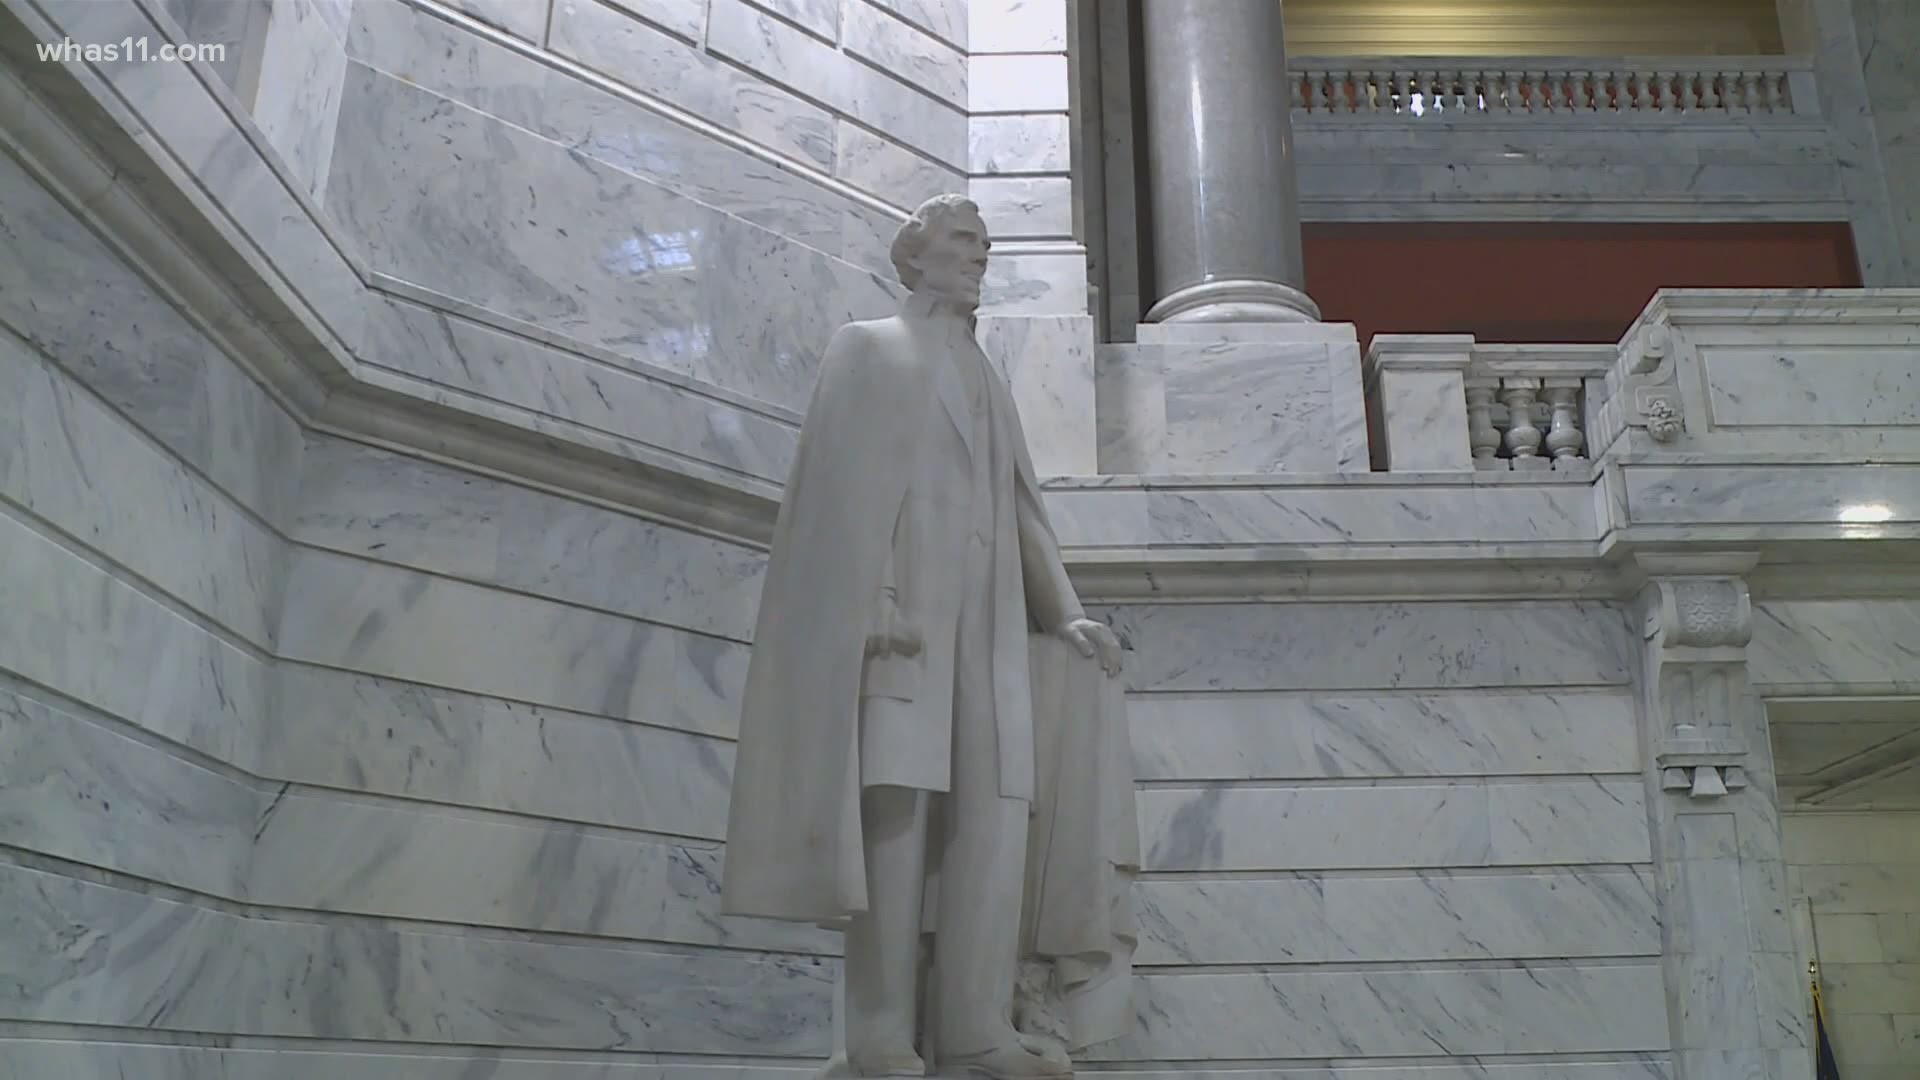 Governor Andy Beshear's office says they are weighing options on removing the Jefferson Davis Statue. He is the third governor in a row to call for it's removal.